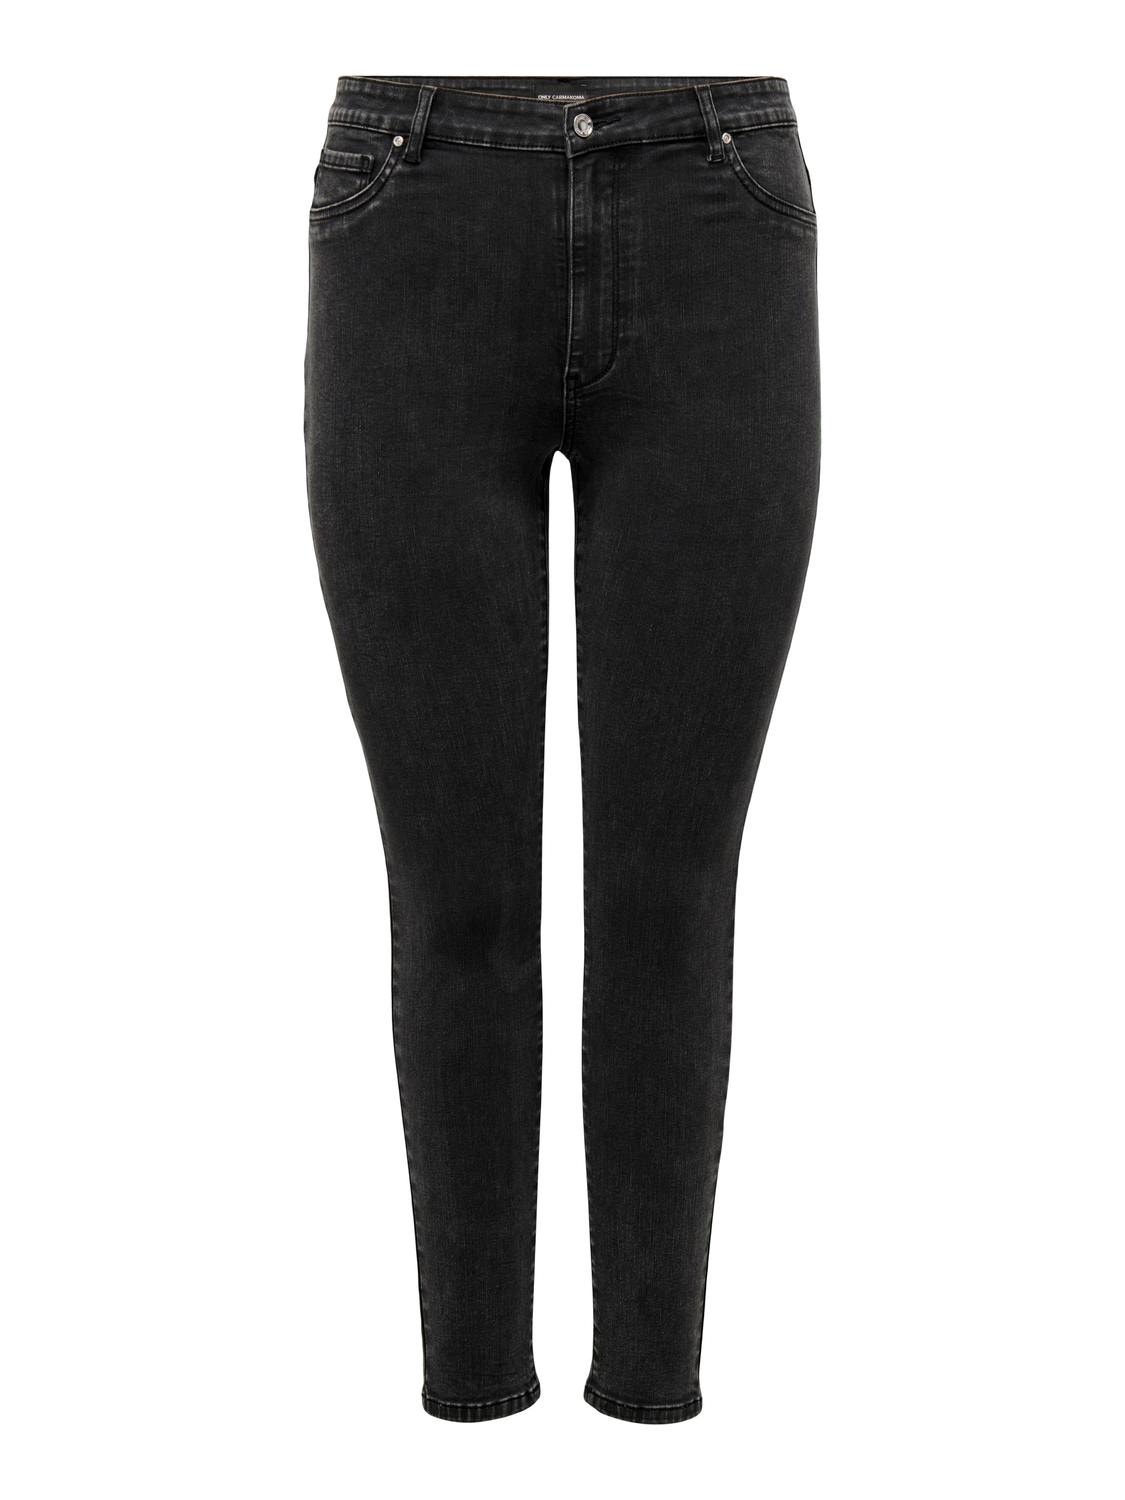 ONLY Skinny Fit High waist Jeans -Washed Black - 15308787